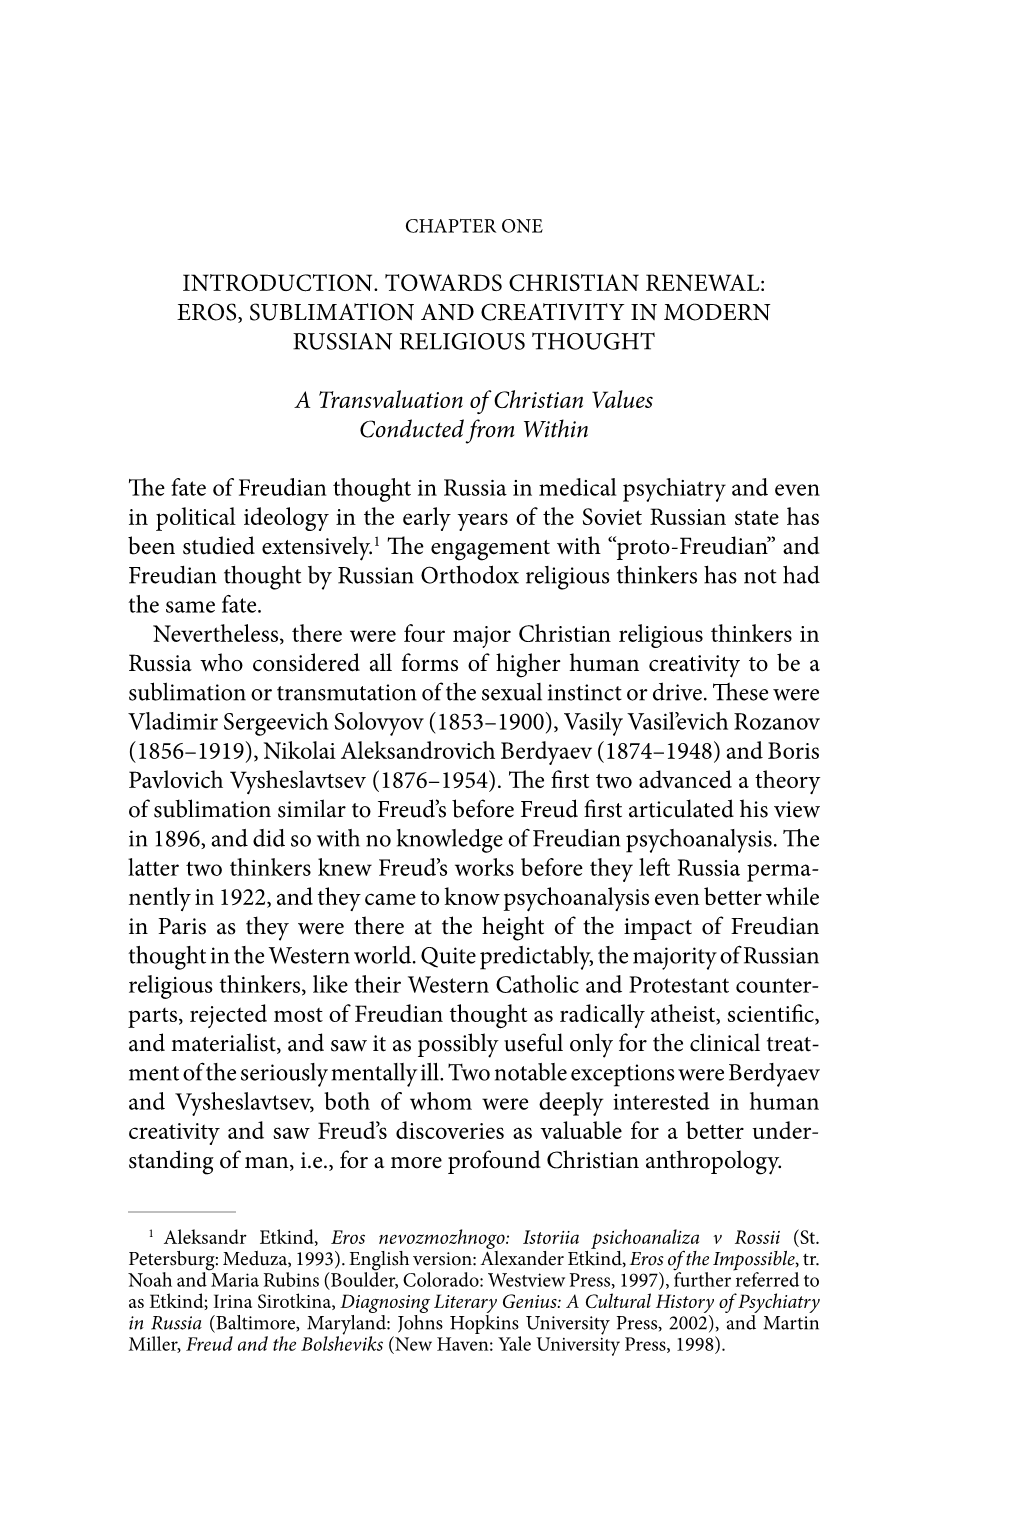 EROS, SUBLIMATION and CREATIVITY in MODERN RUSSIAN RELIGIOUS THOUGHT a Transvaluation O